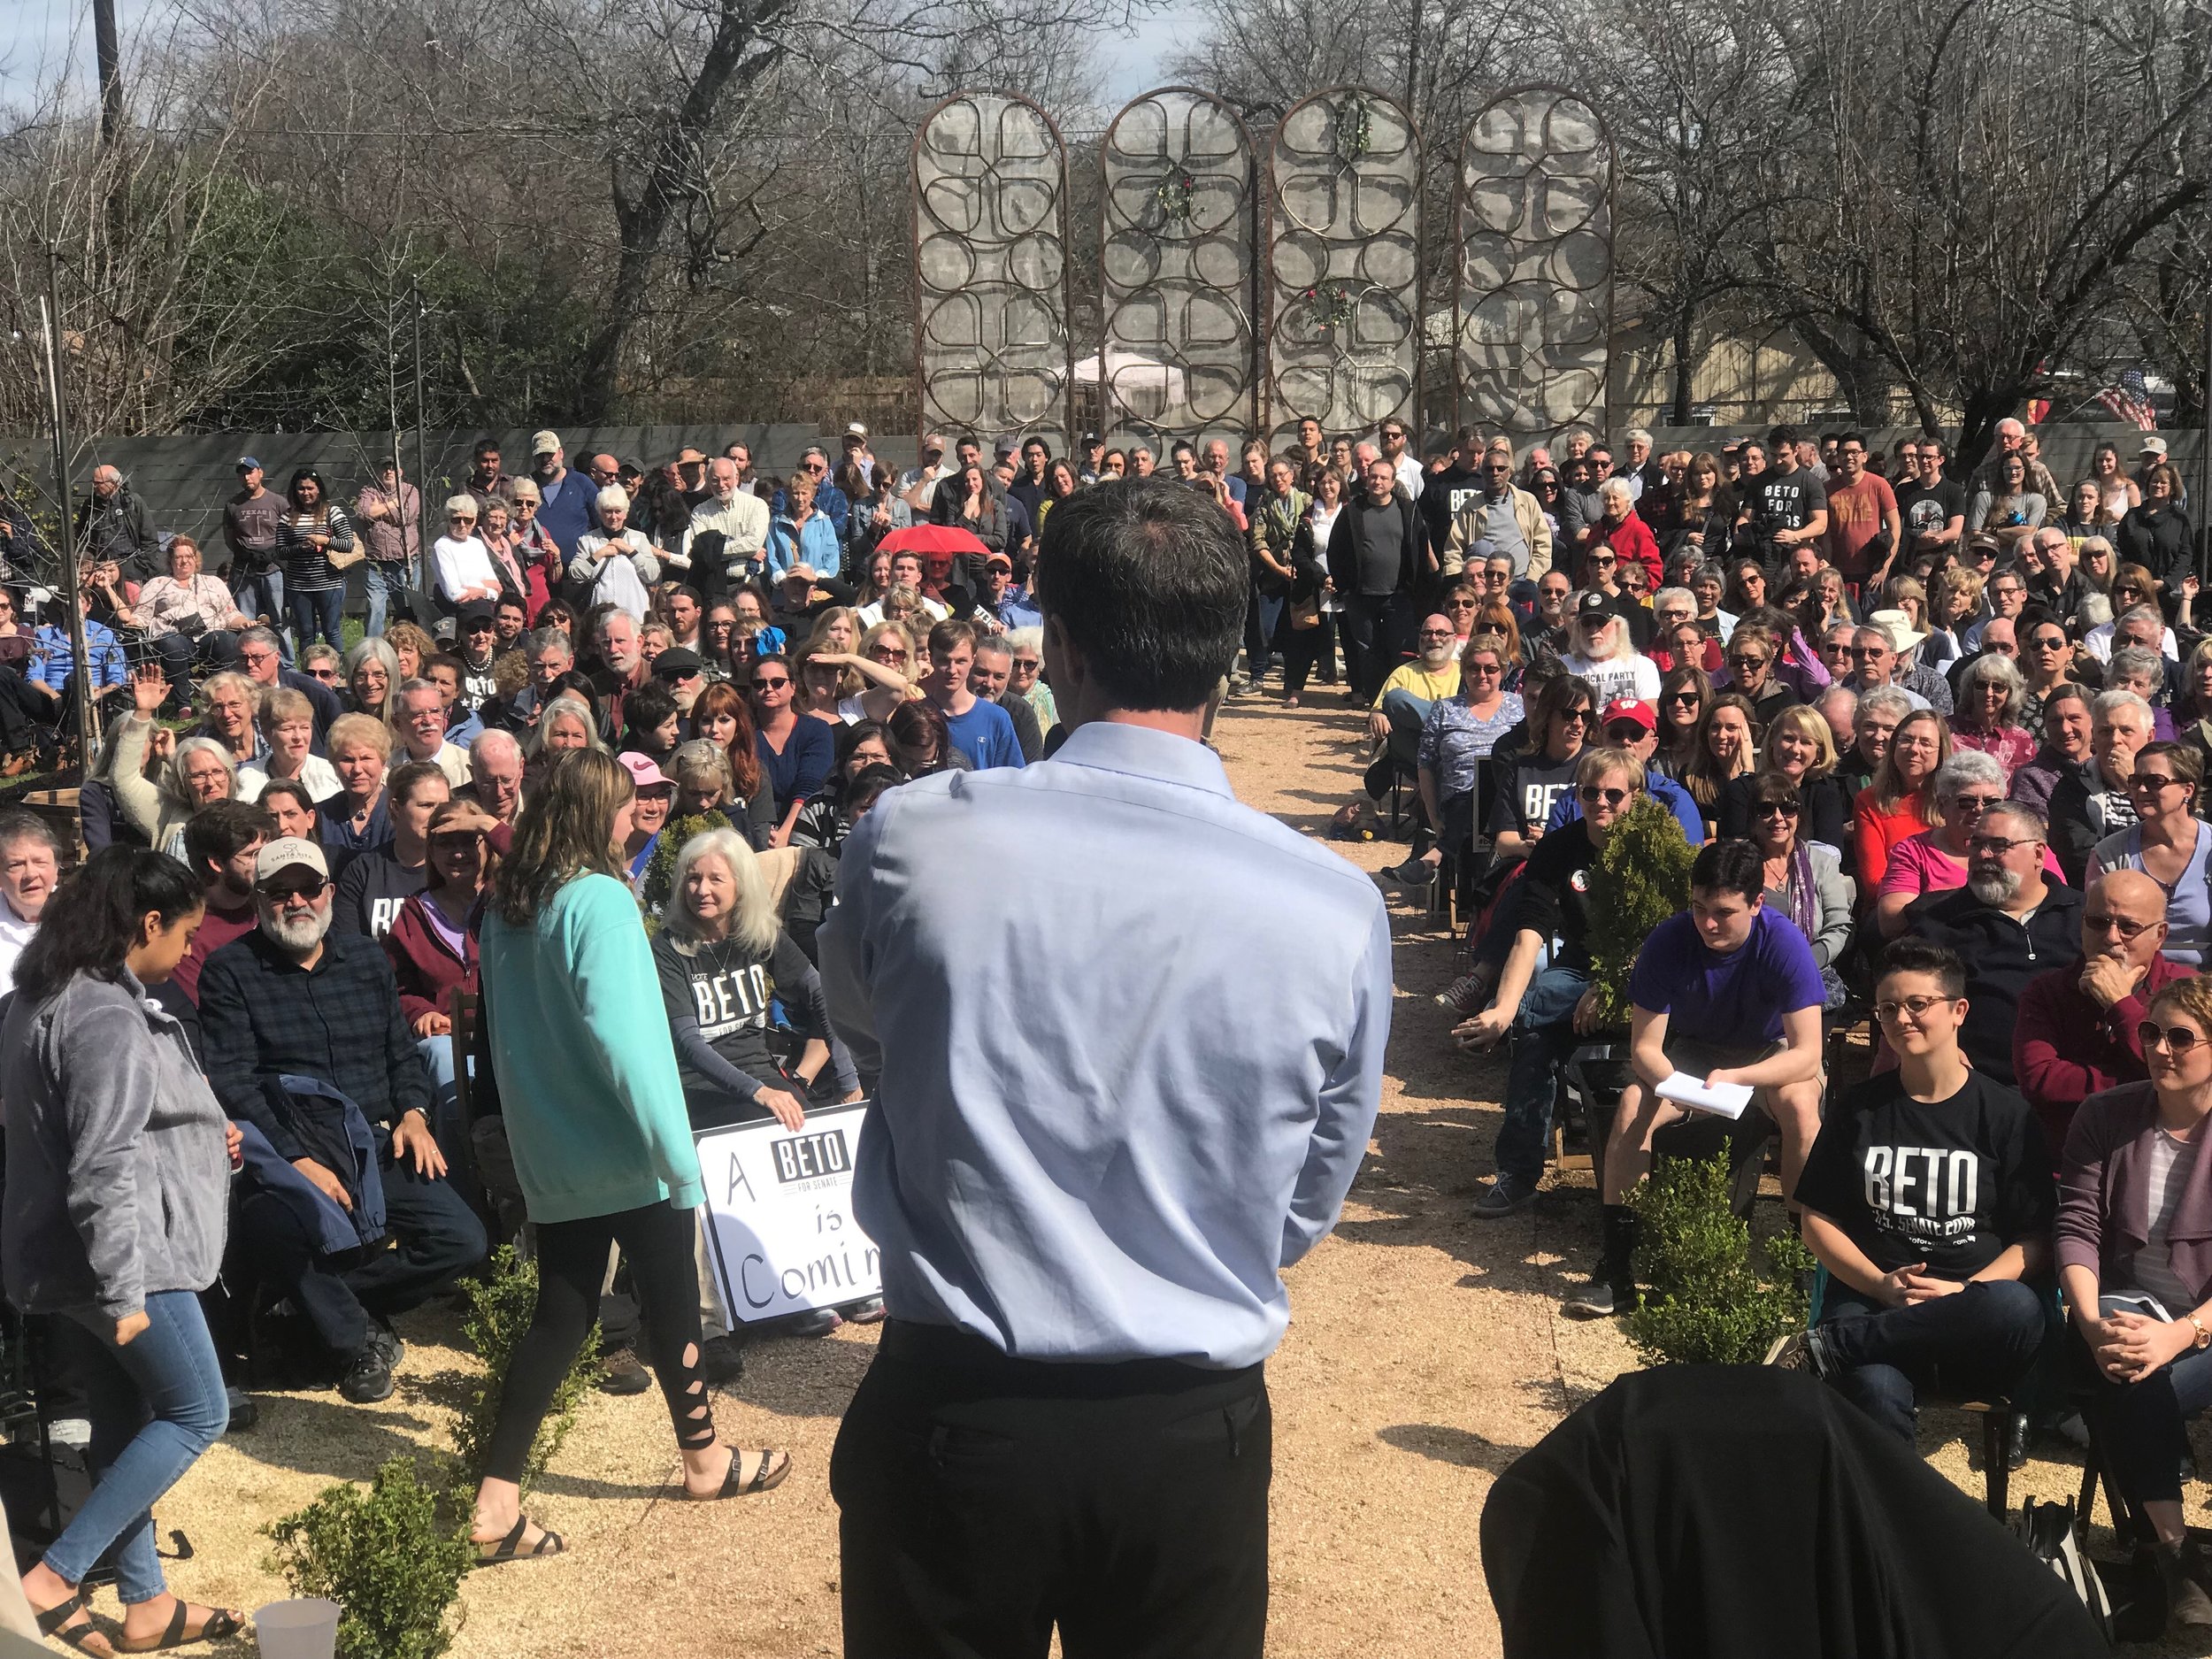  Beto O'Rourke, a Texas Democrat challenging GOP Sen. Ted Cruz, speaks at a town hall event in Georgetown, Texas. Photo by Rick Holmes 